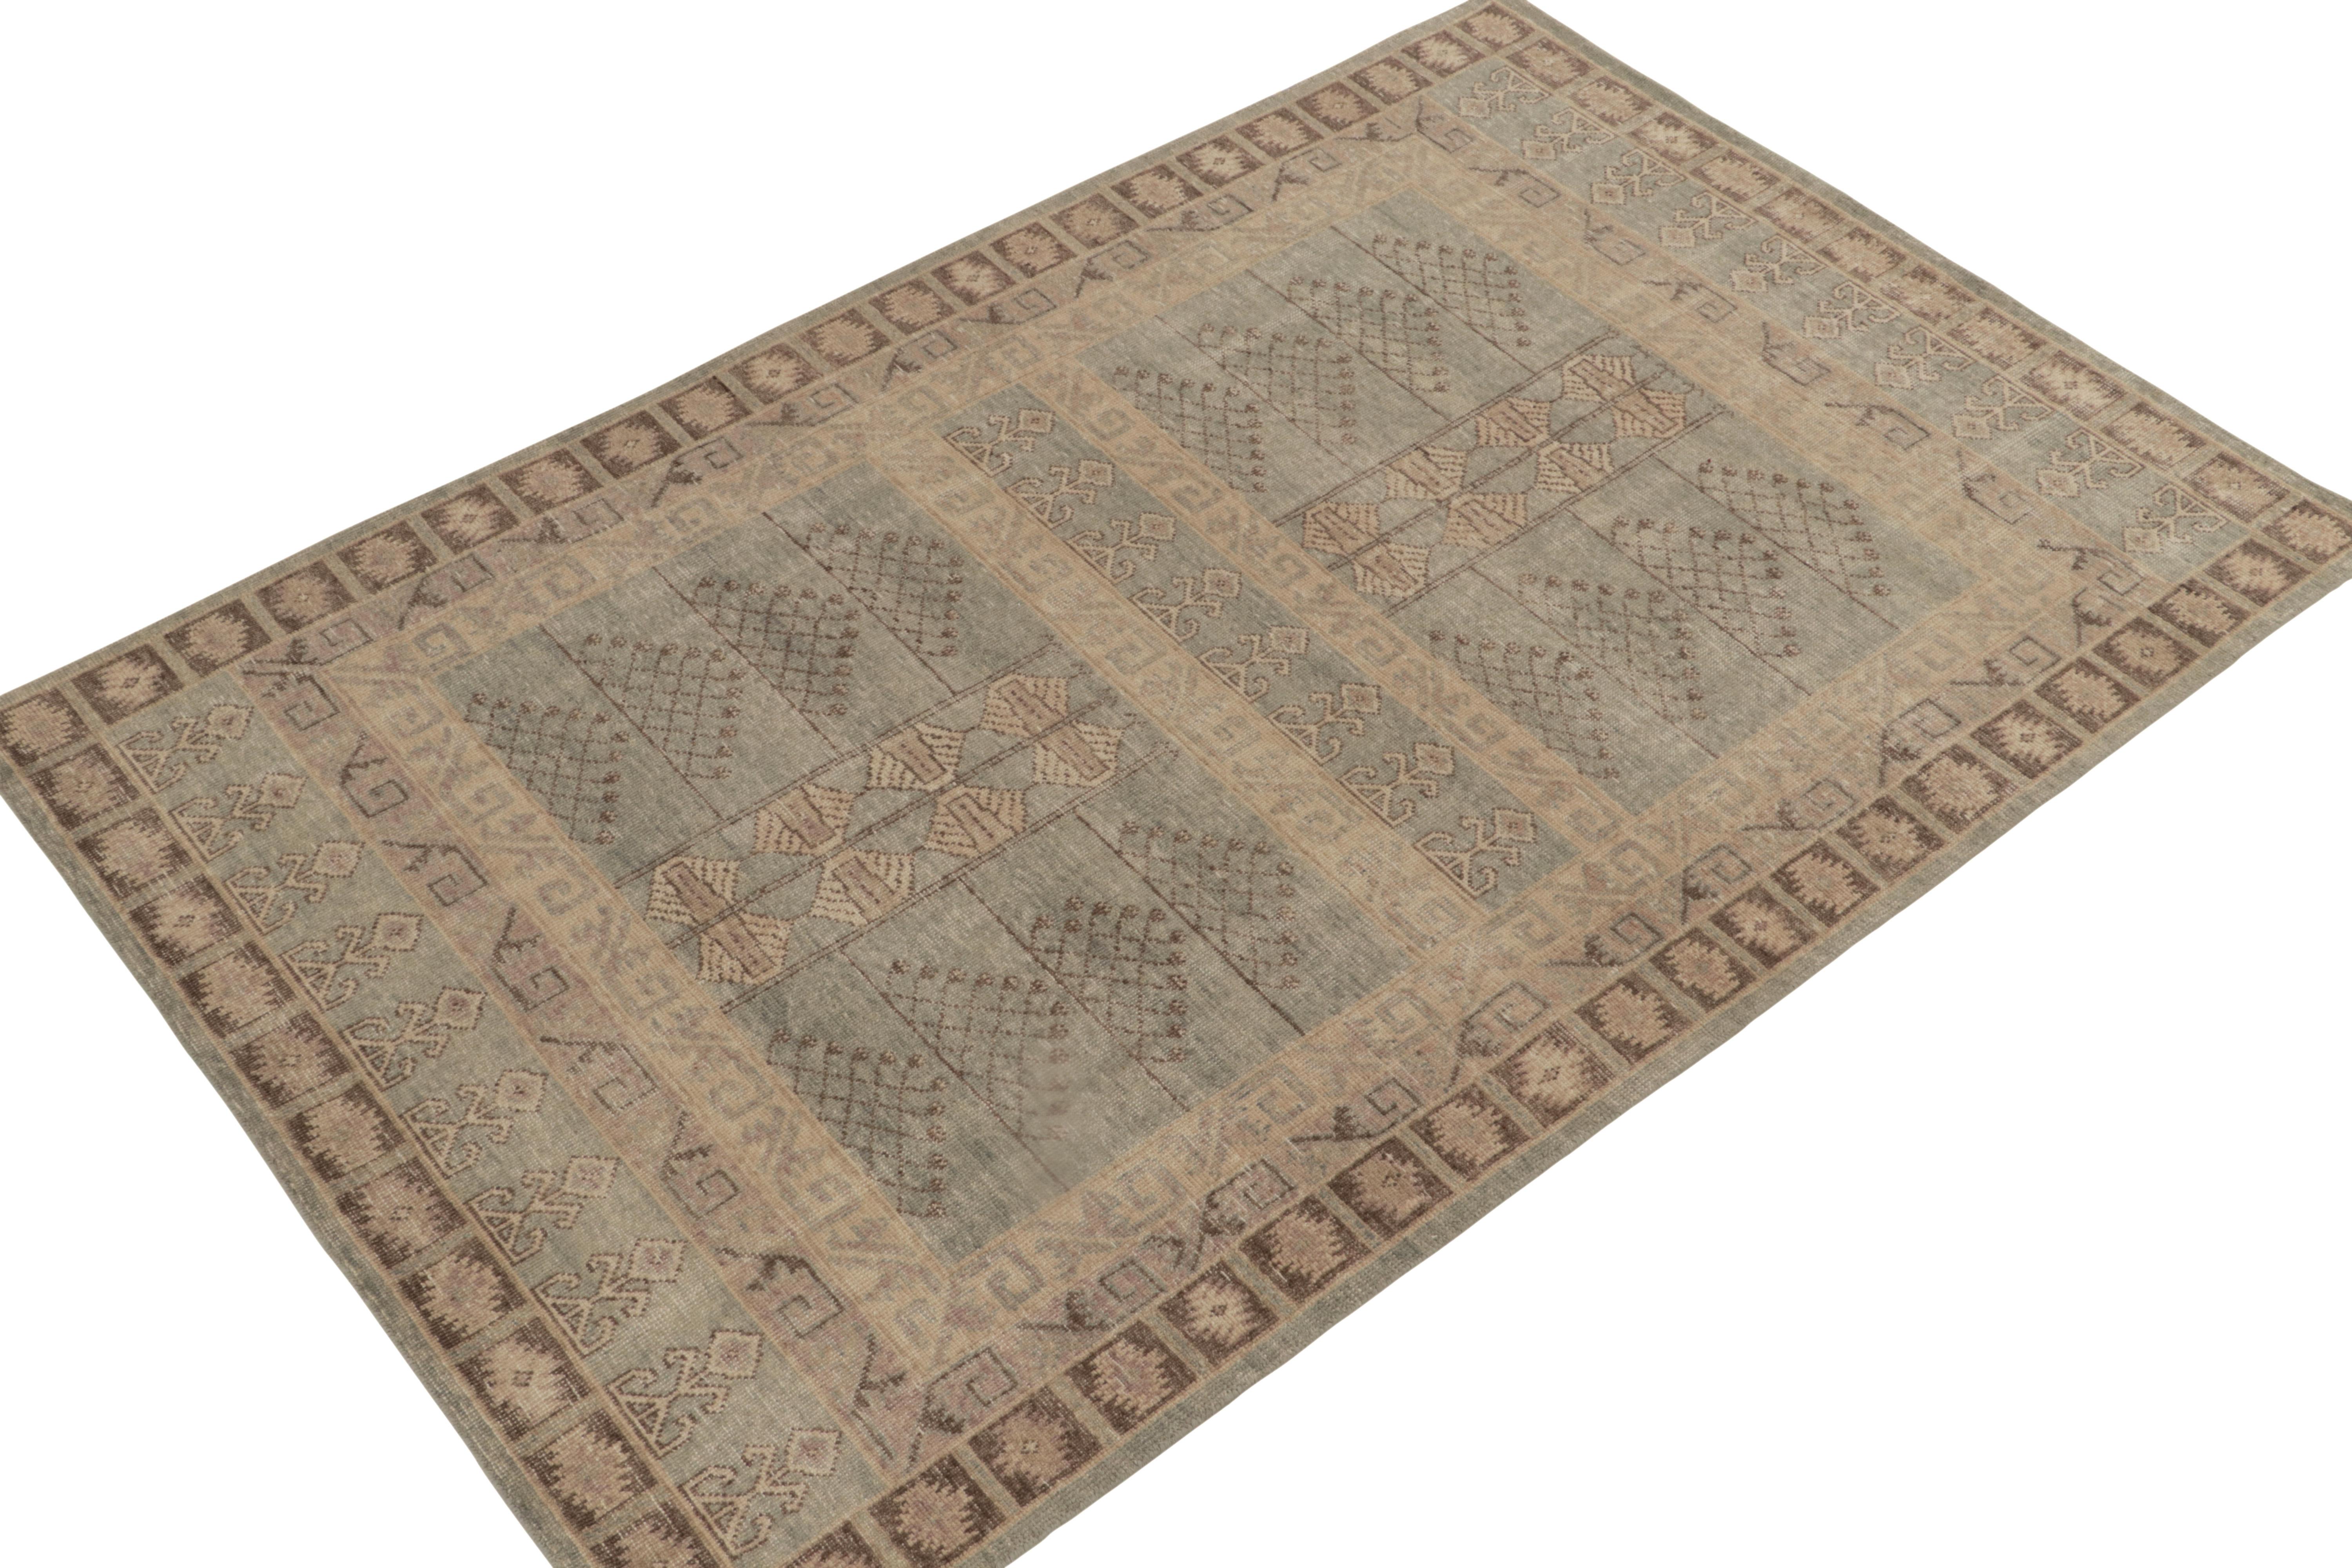 A 6x9 hand-knotted wool rug from Rug & Kilim’s Homage Collection—representing a new textural encyclopedia of the most coveted styles.

On the Design: This vision stands inspired by antique Turkmen rugs, sometimes called Ensi rugs for these distinct